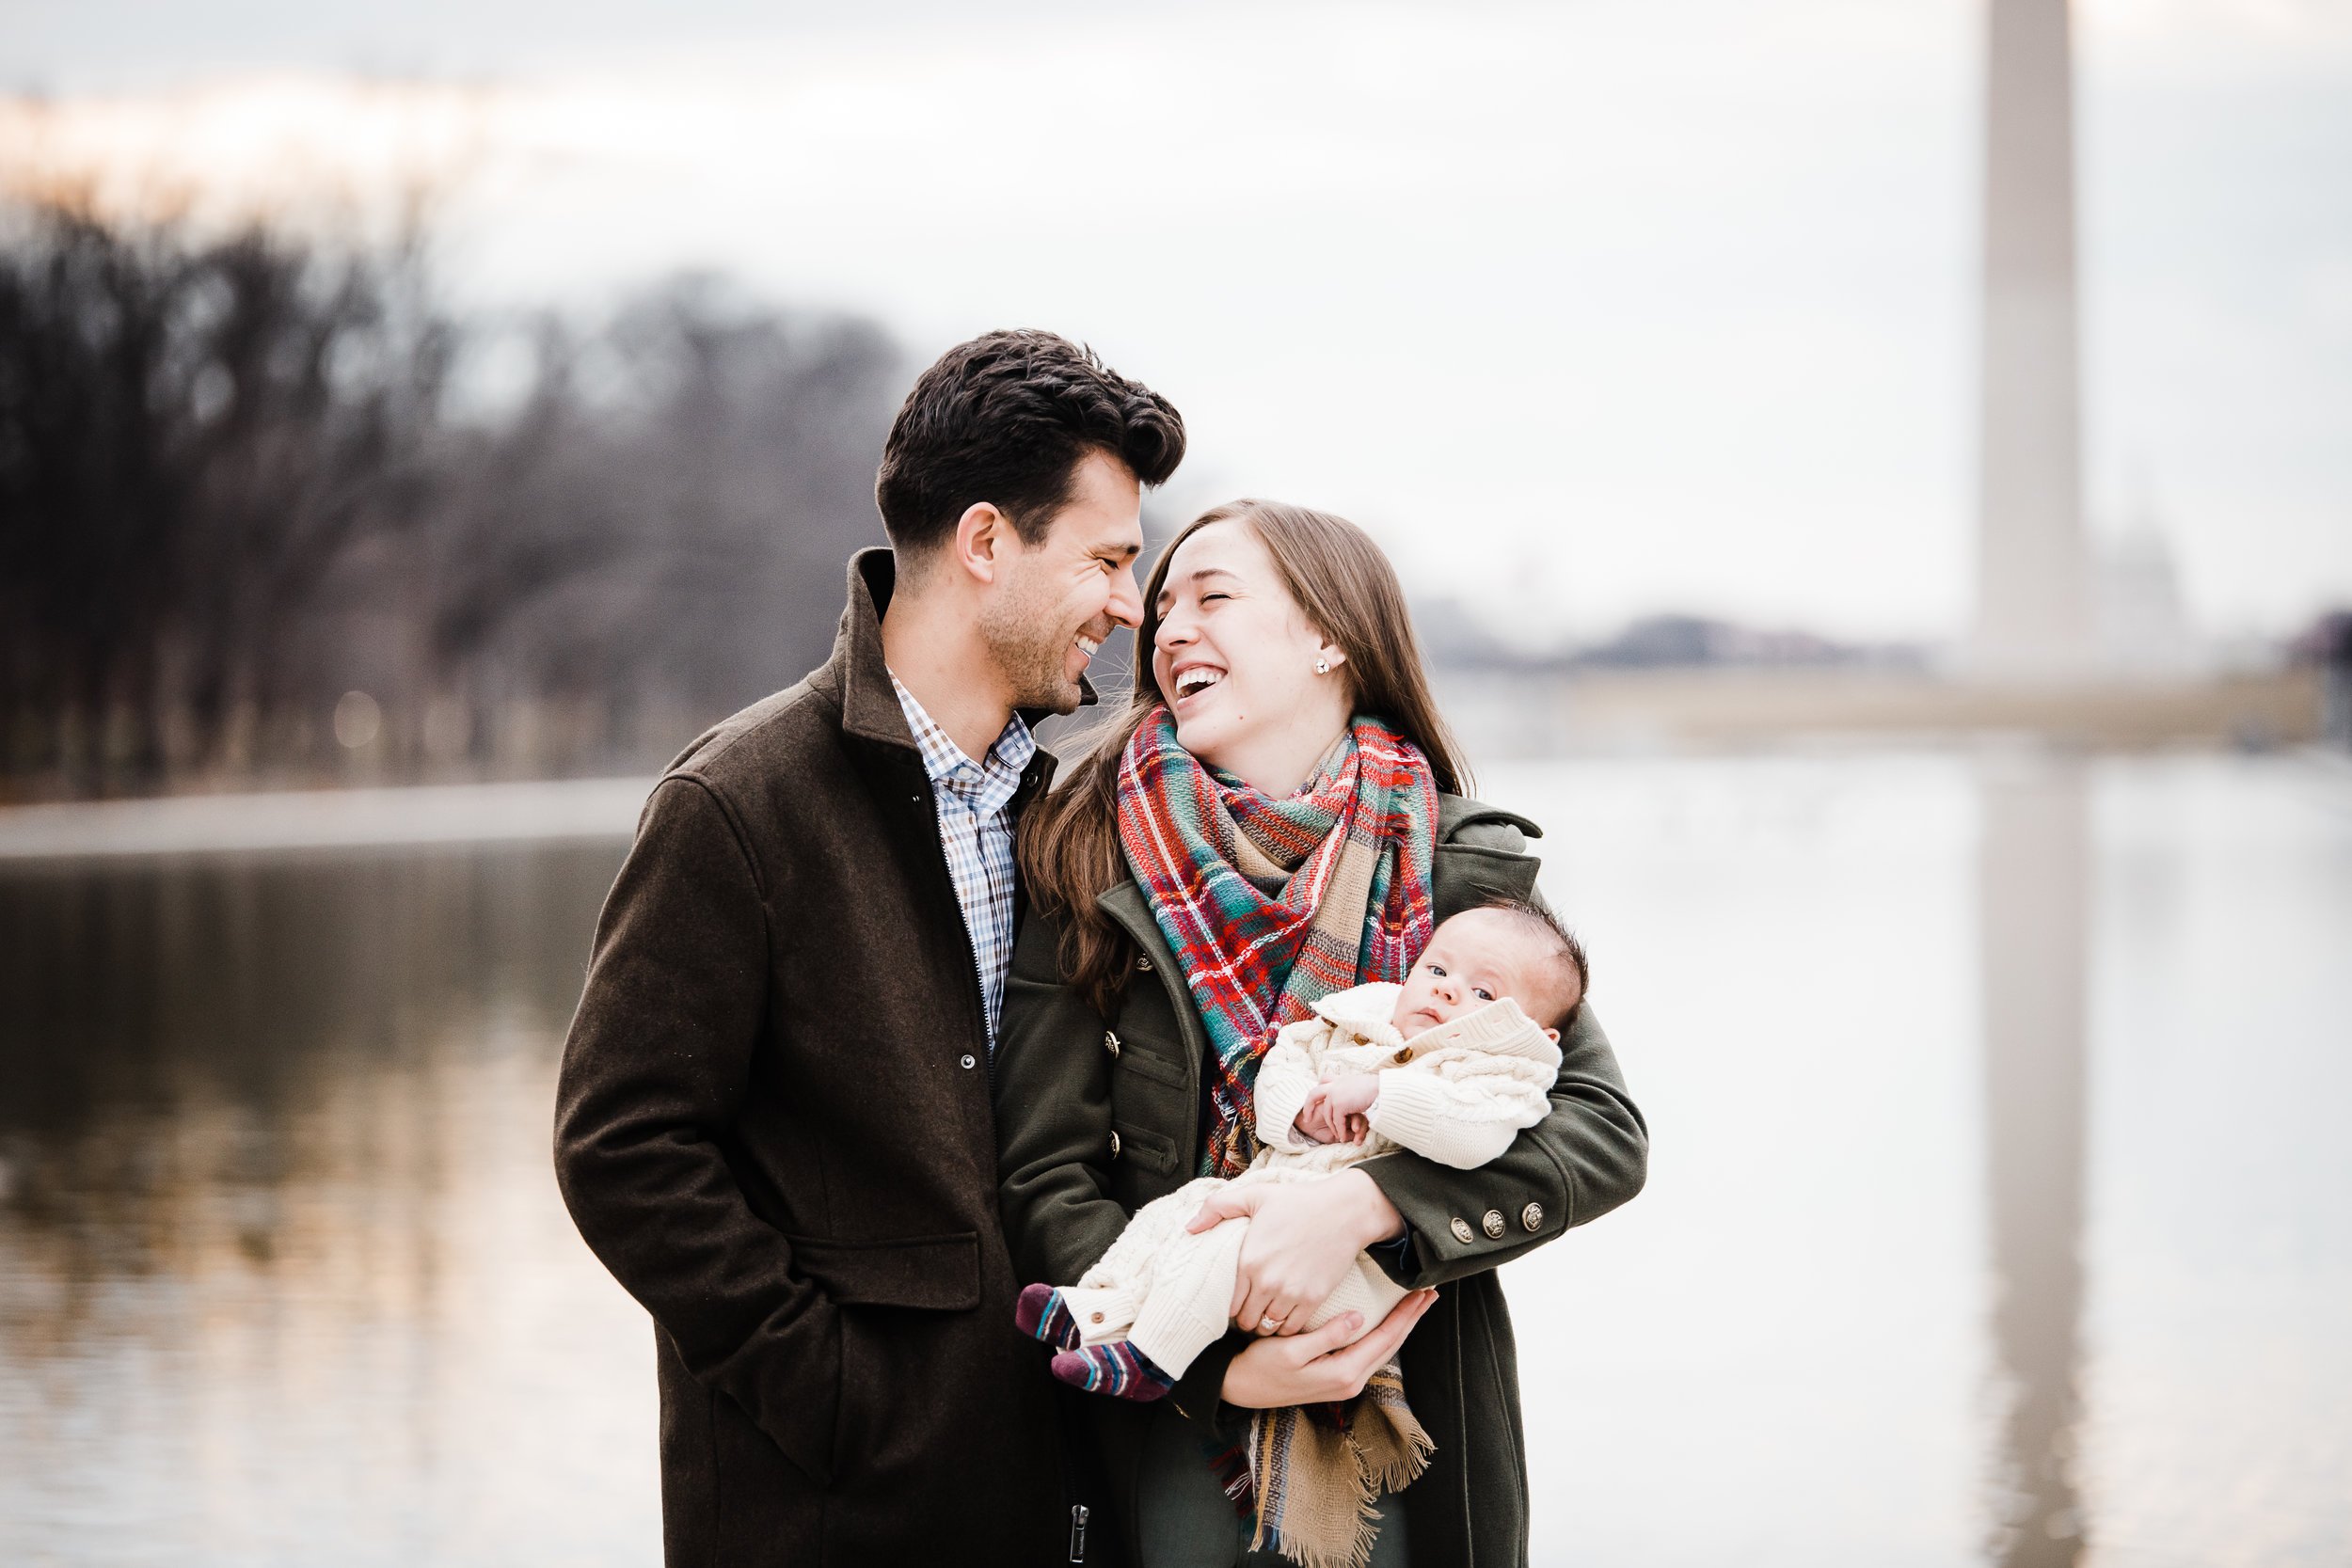 Family photography at the National Mall